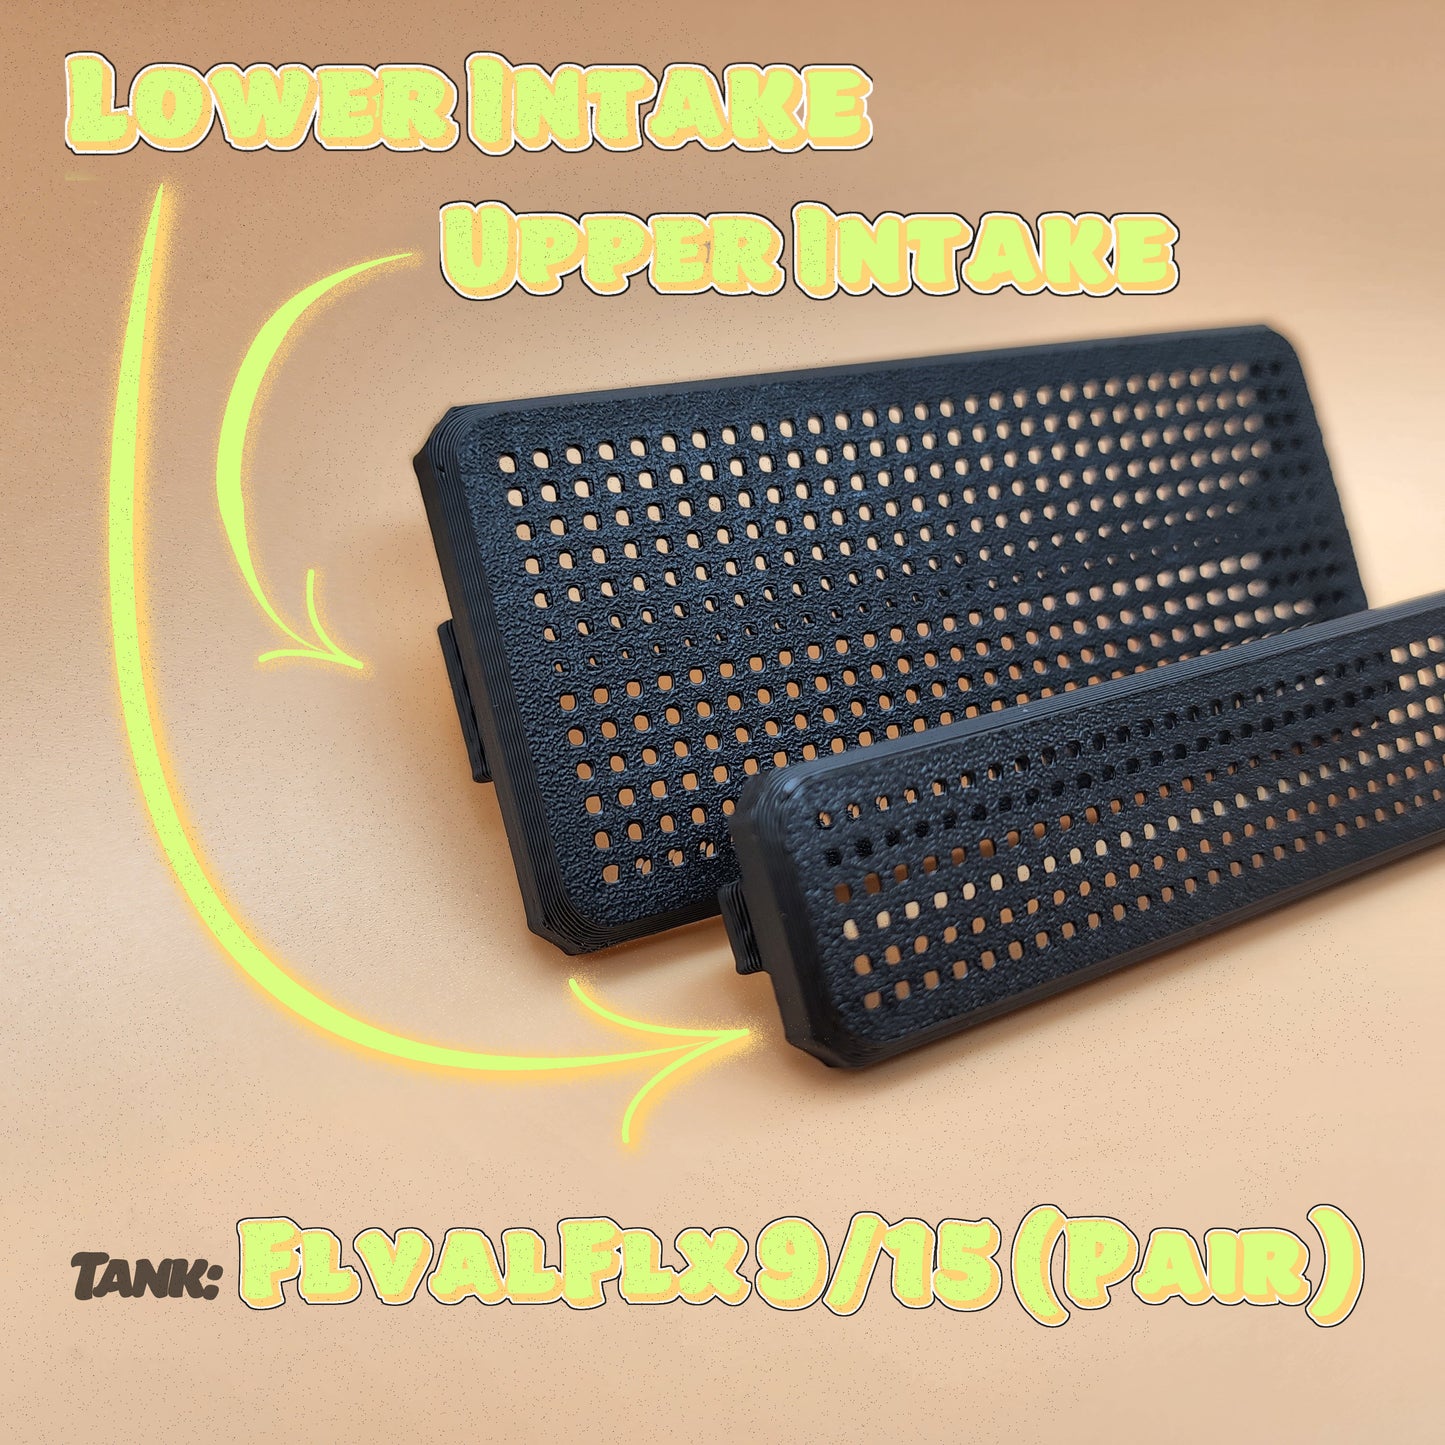 Overflow Covers for Aquarium Filter Intakes (Many Tank Models)